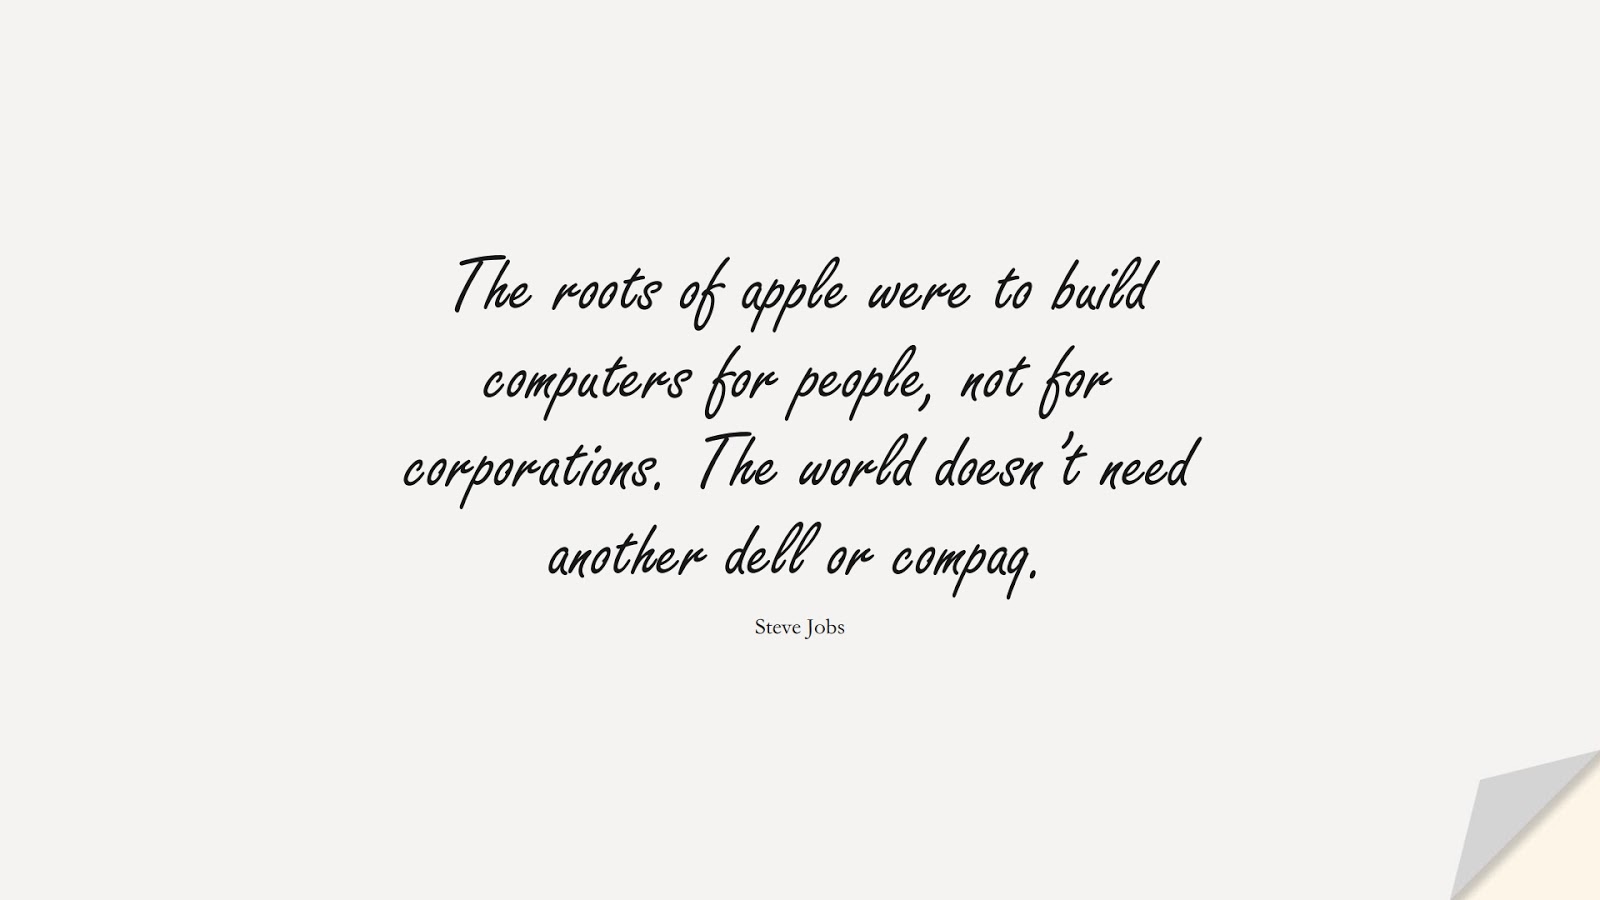 The roots of apple were to build computers for people, not for corporations. The world doesn’t need another dell or compaq. (Steve Jobs);  #SteveJobsQuotes